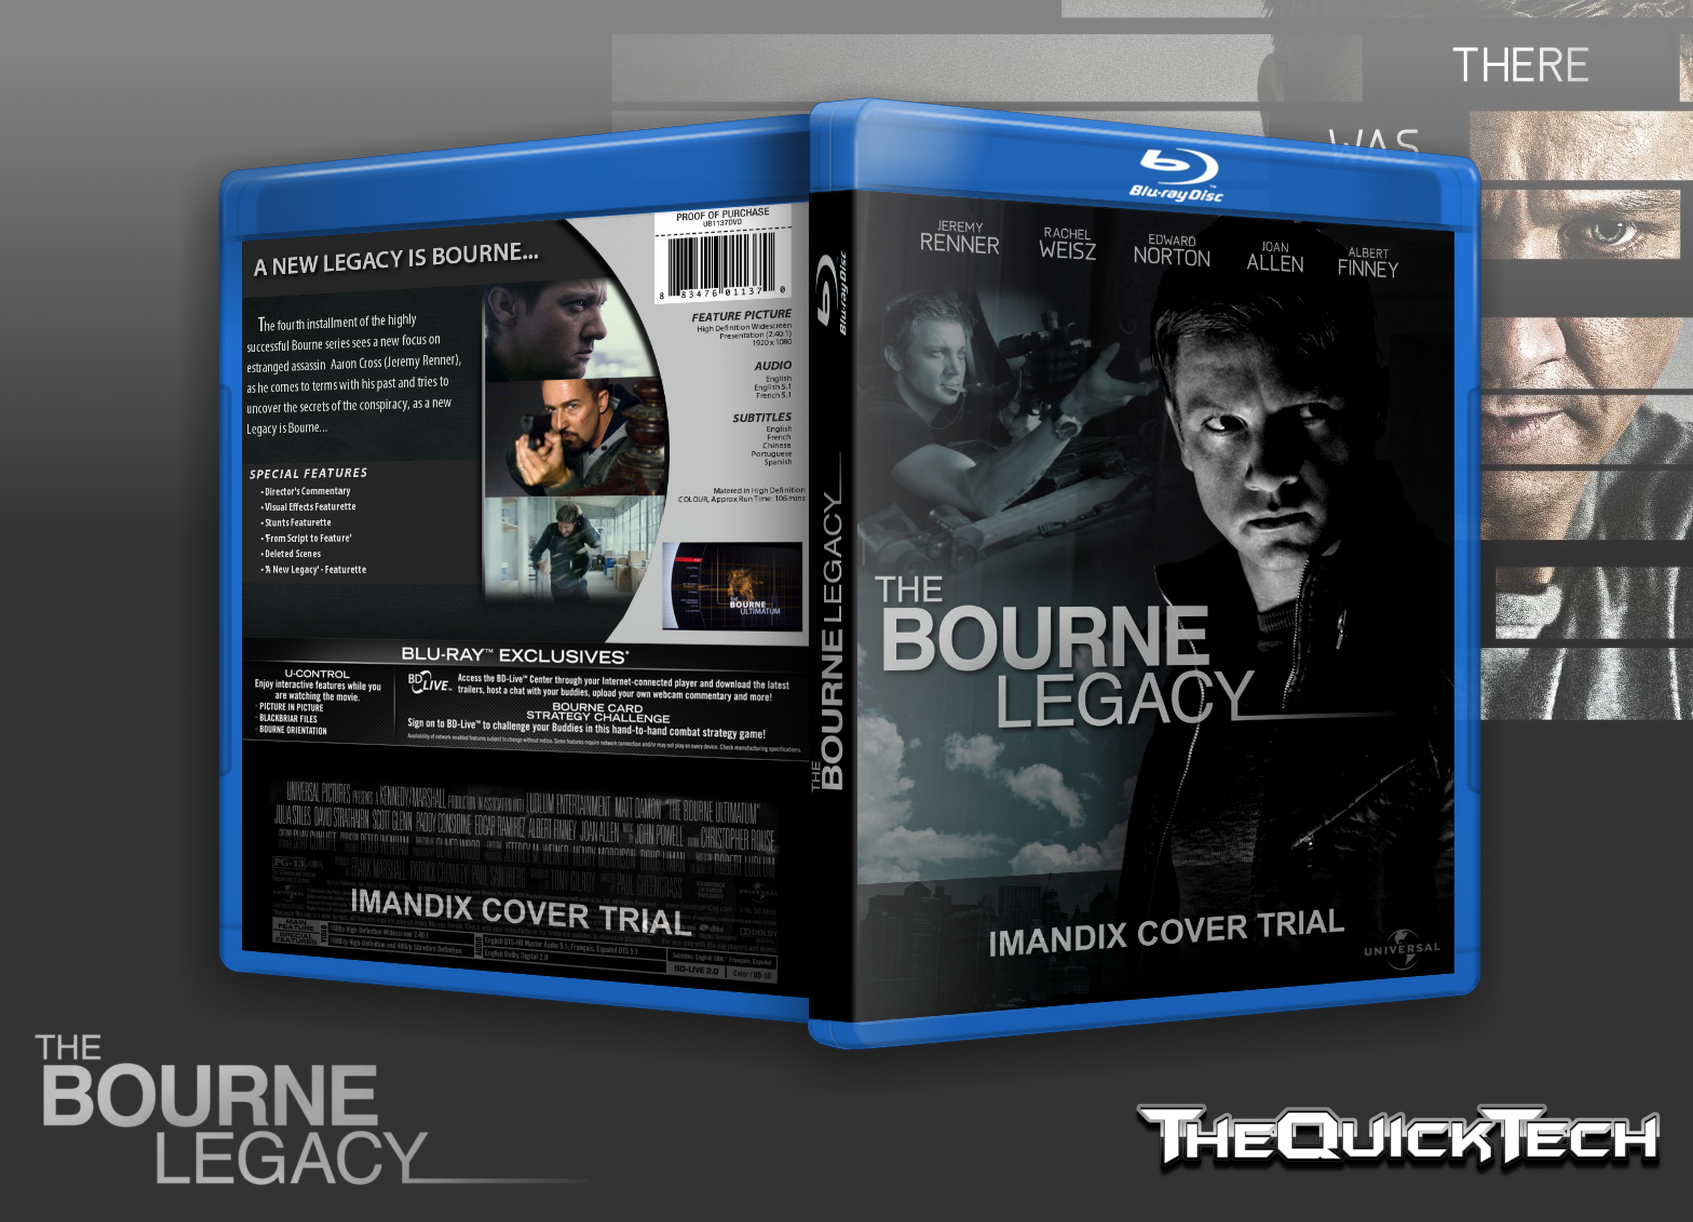 The Bourne Legacy box cover